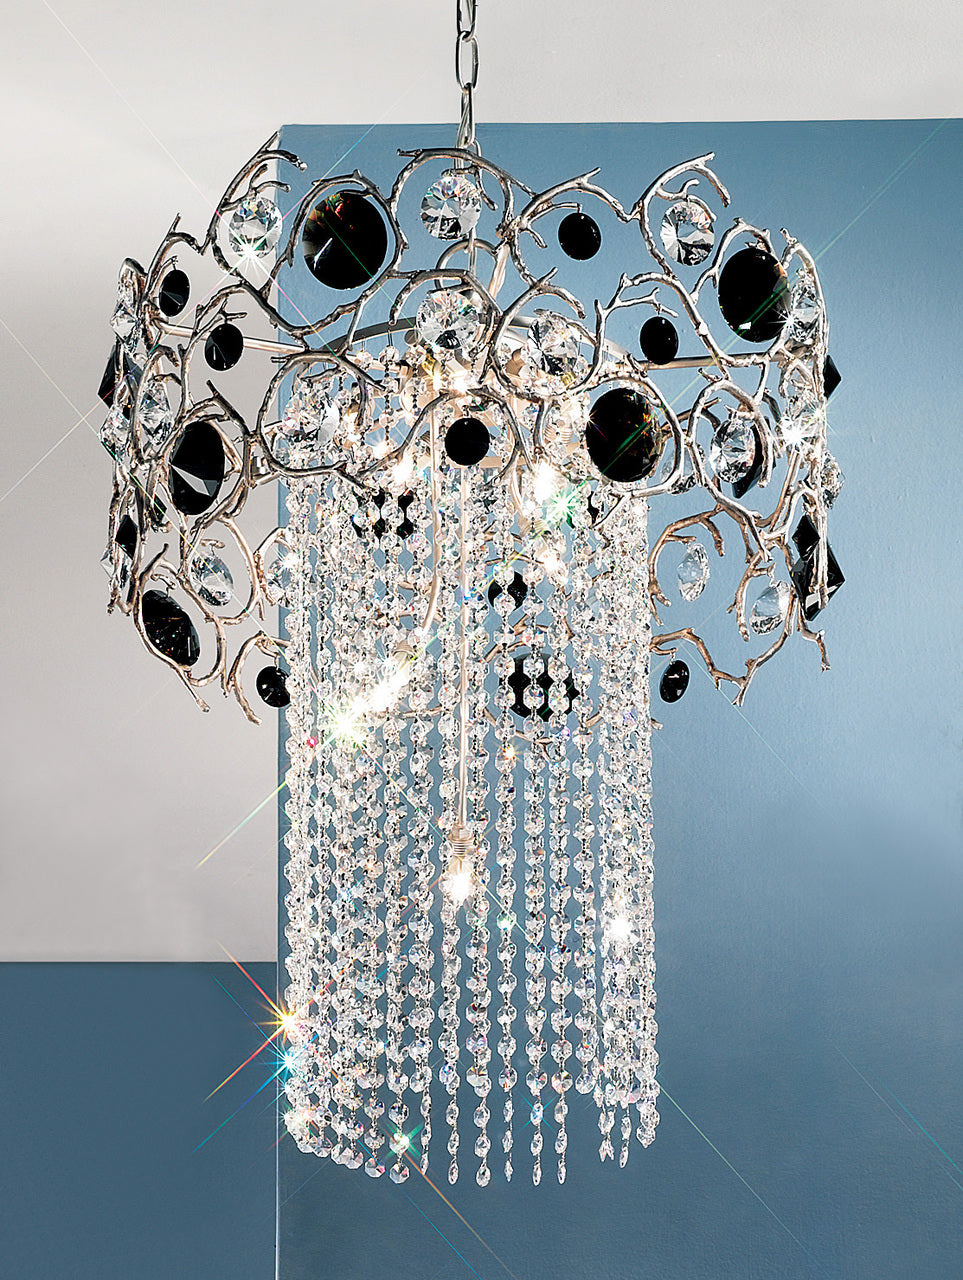 Classic Lighting 10034 NBZ SA Foresta Colorita Crystal Chandelier in Natural Bronze (Imported from Portugal)